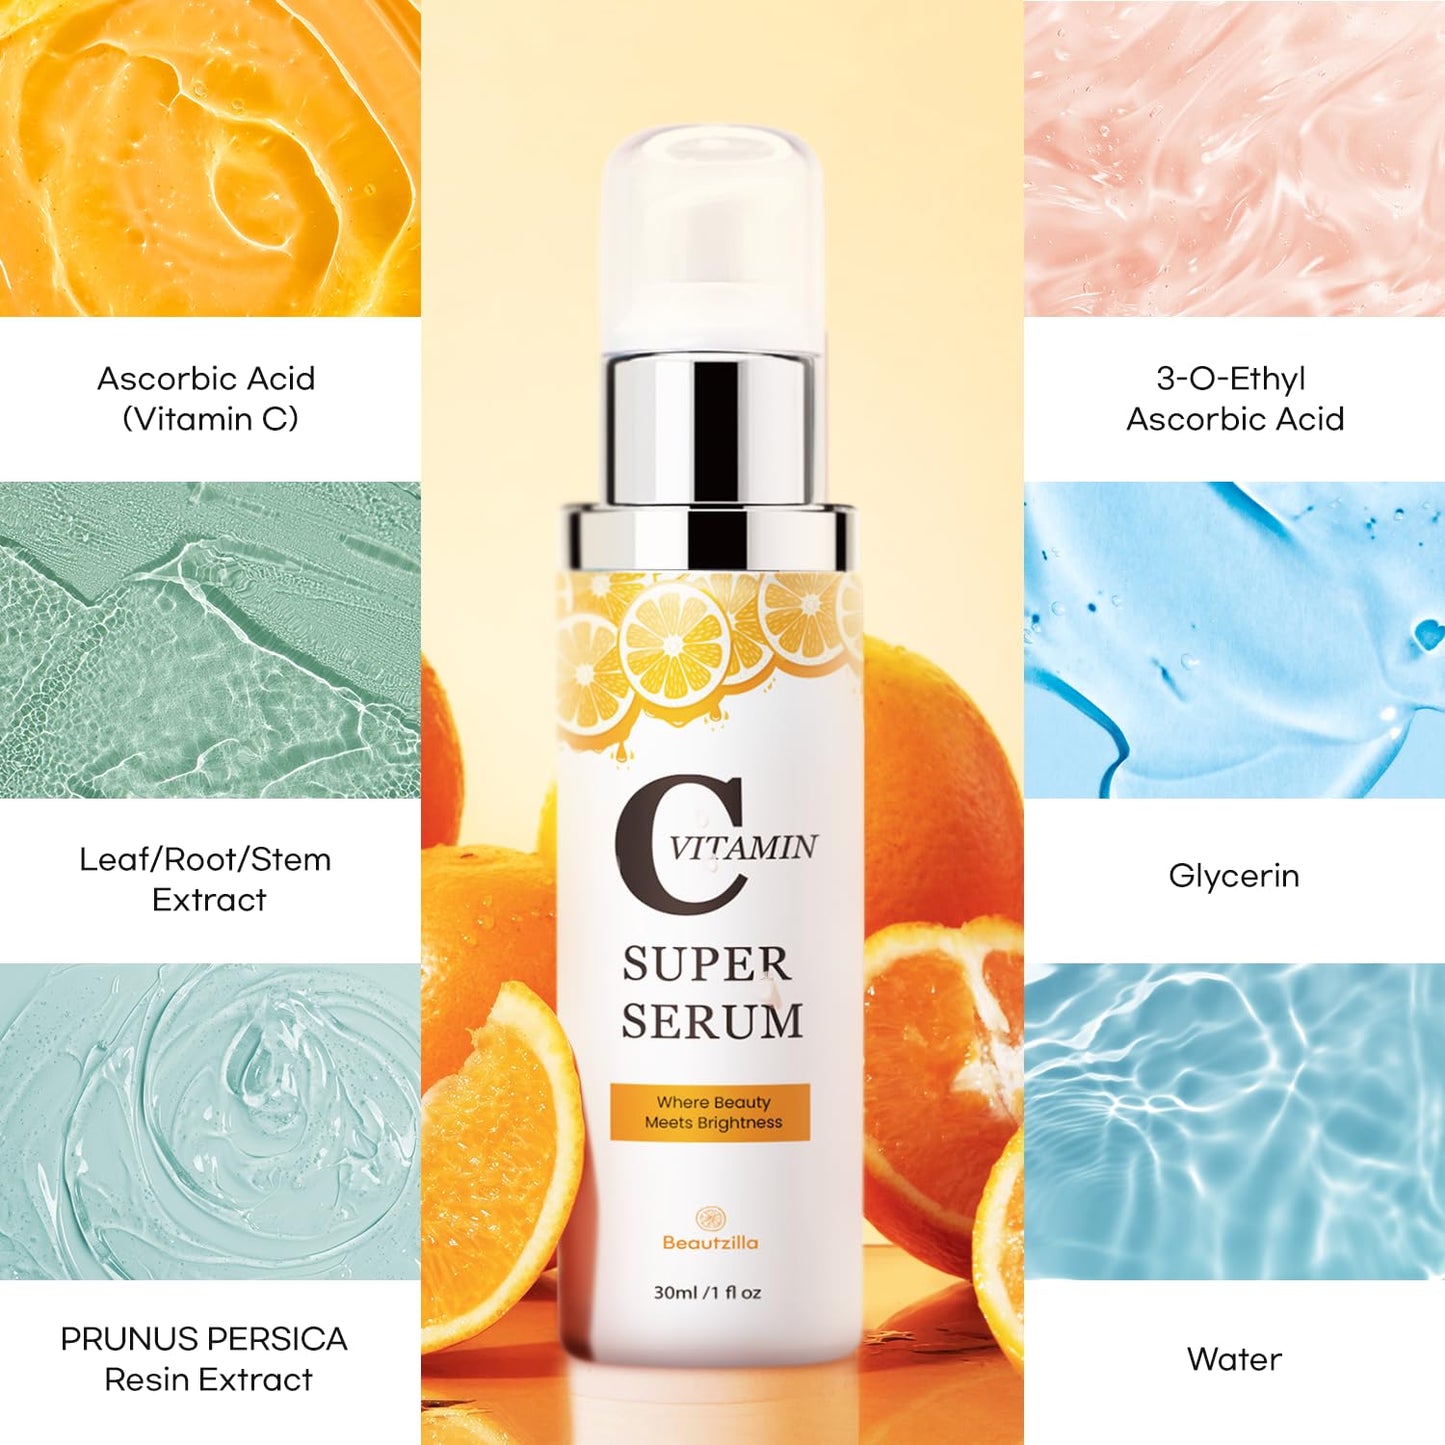 Super Vitamin C Serum for Face with Hyaluronic Acid and Vitamin E - Age-Defying Serum for Dark Spots, Fine Lines, Wrinkles for Women Over 50, Penetrating For Mature Skin, All-in-One Formula - 1 fl oz